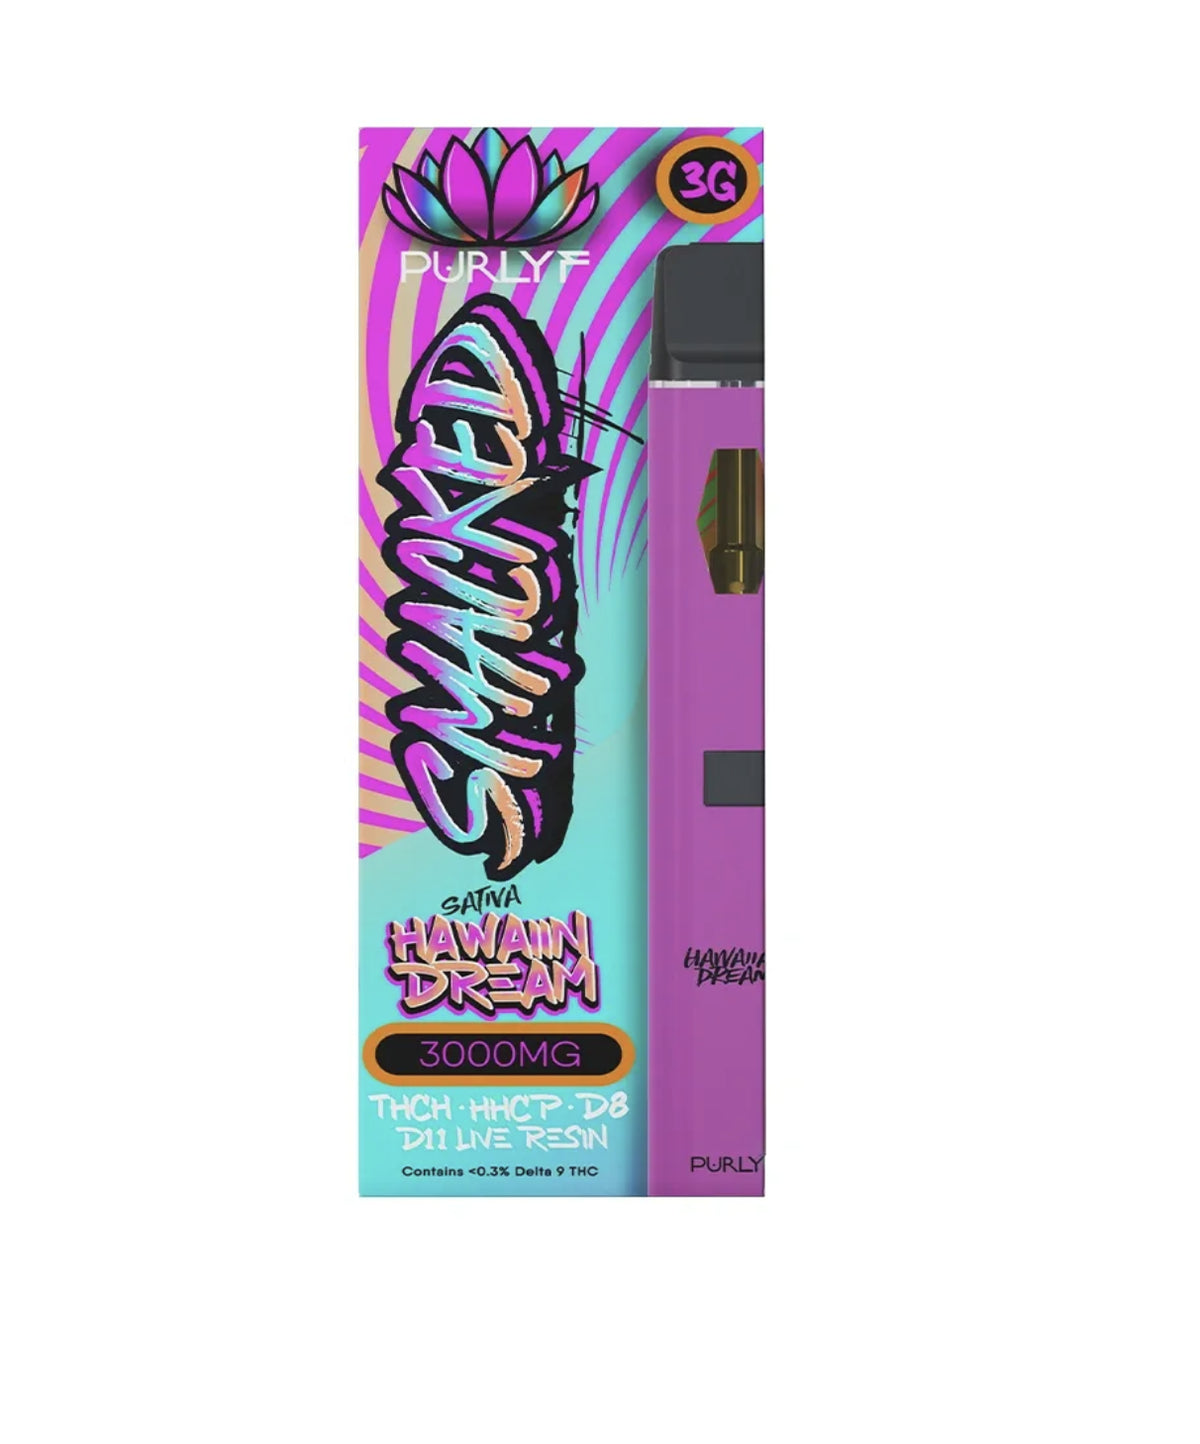 Purlyf Smacked Delta-8 Live Resin Disposable Vapes (3g) Best Price